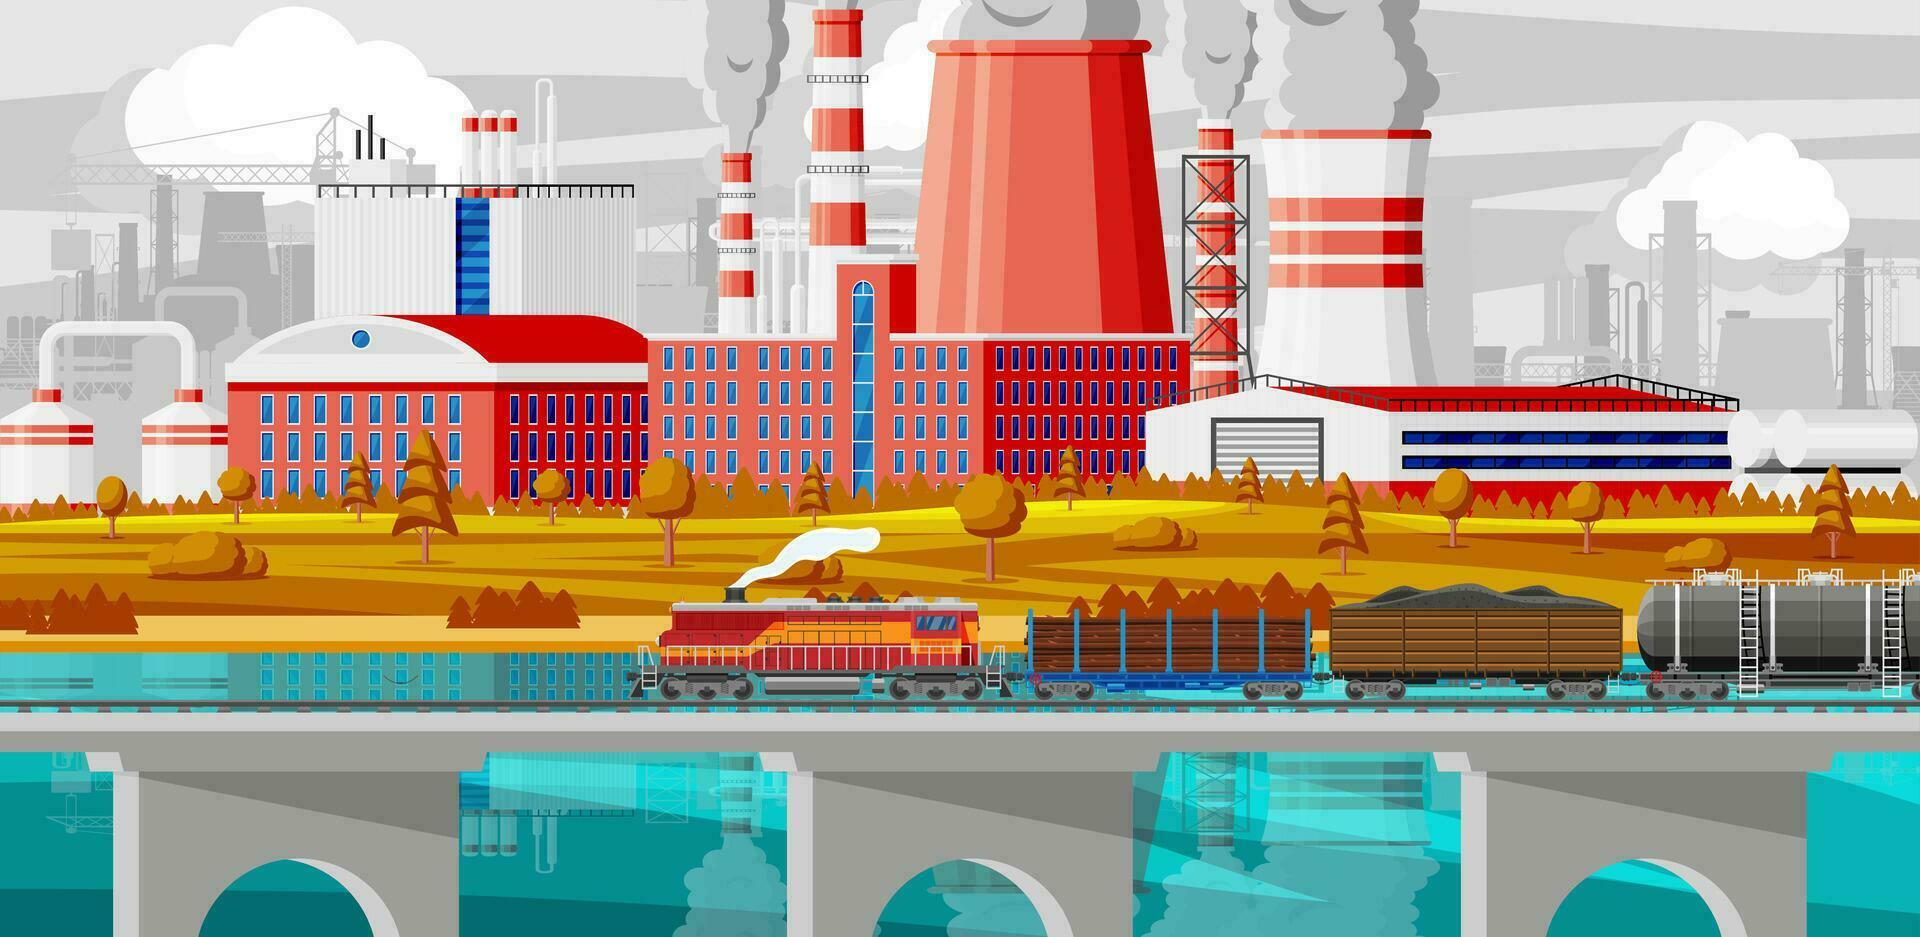 Industrial Landscape of Cargo Rail Transportation with Plant and Fuming Pipes. Factory Building. Pipes, Buildings, Warehouse, Freight Railway Station. Cityscape Urban Skyline. Flat Vector Illustration